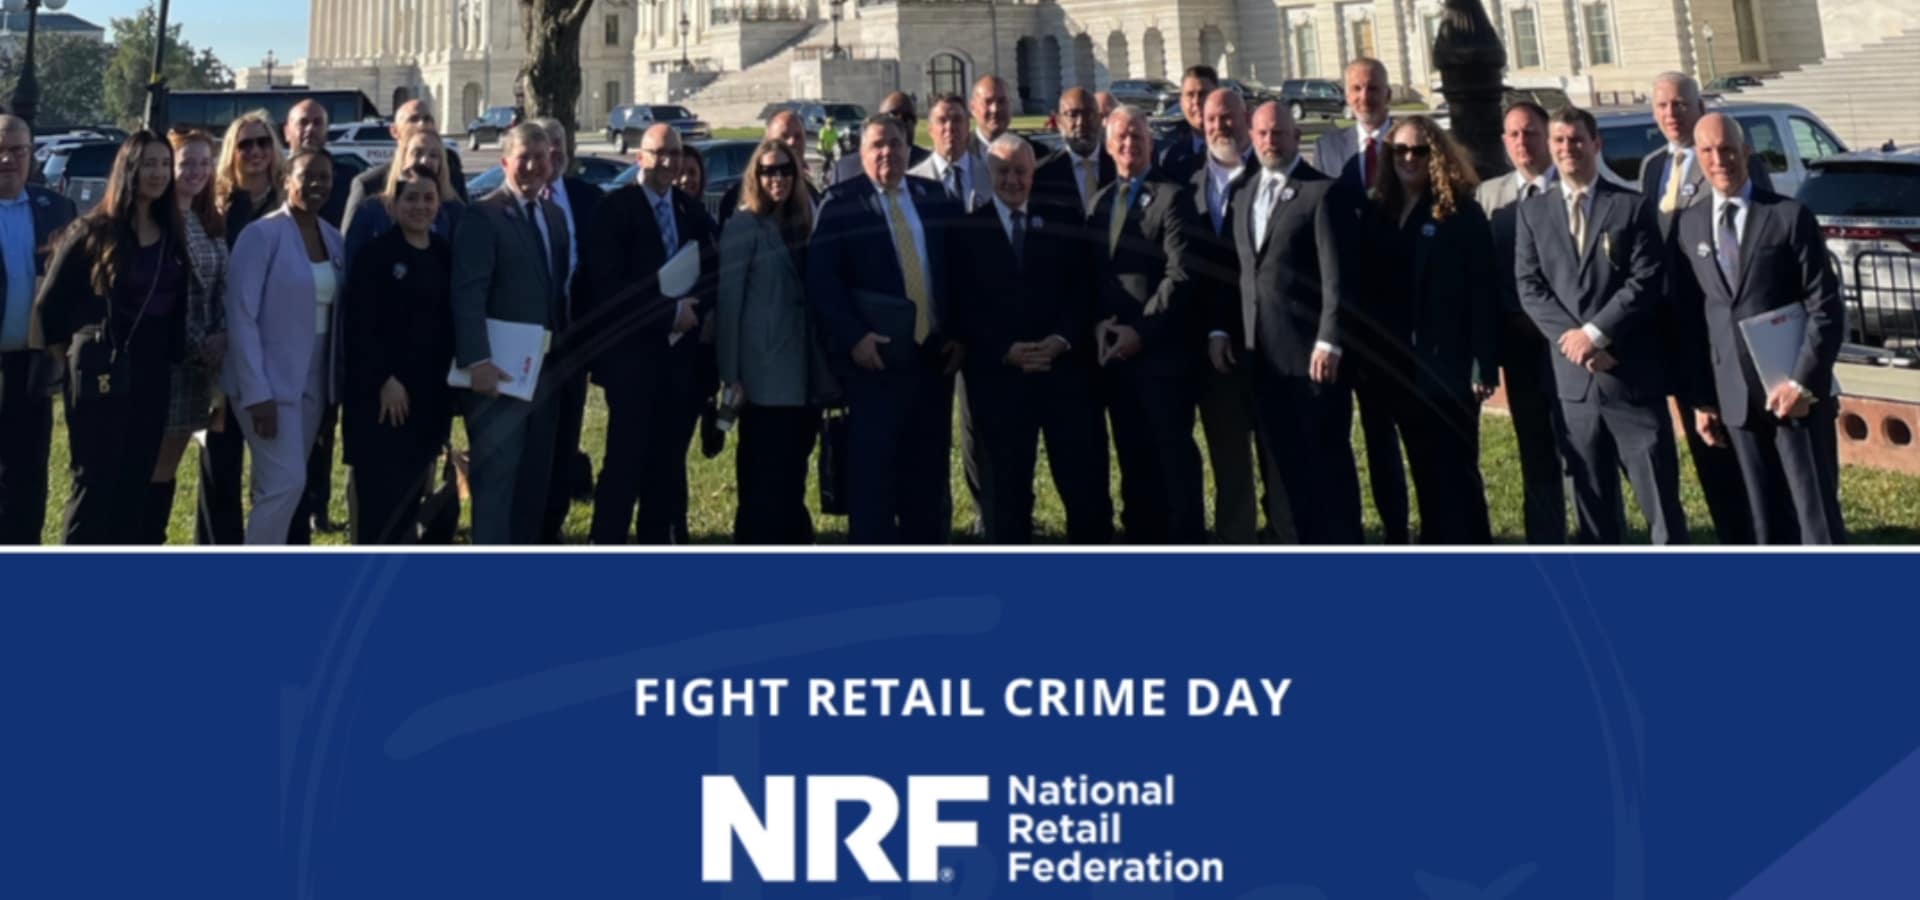 Fight retail crime day